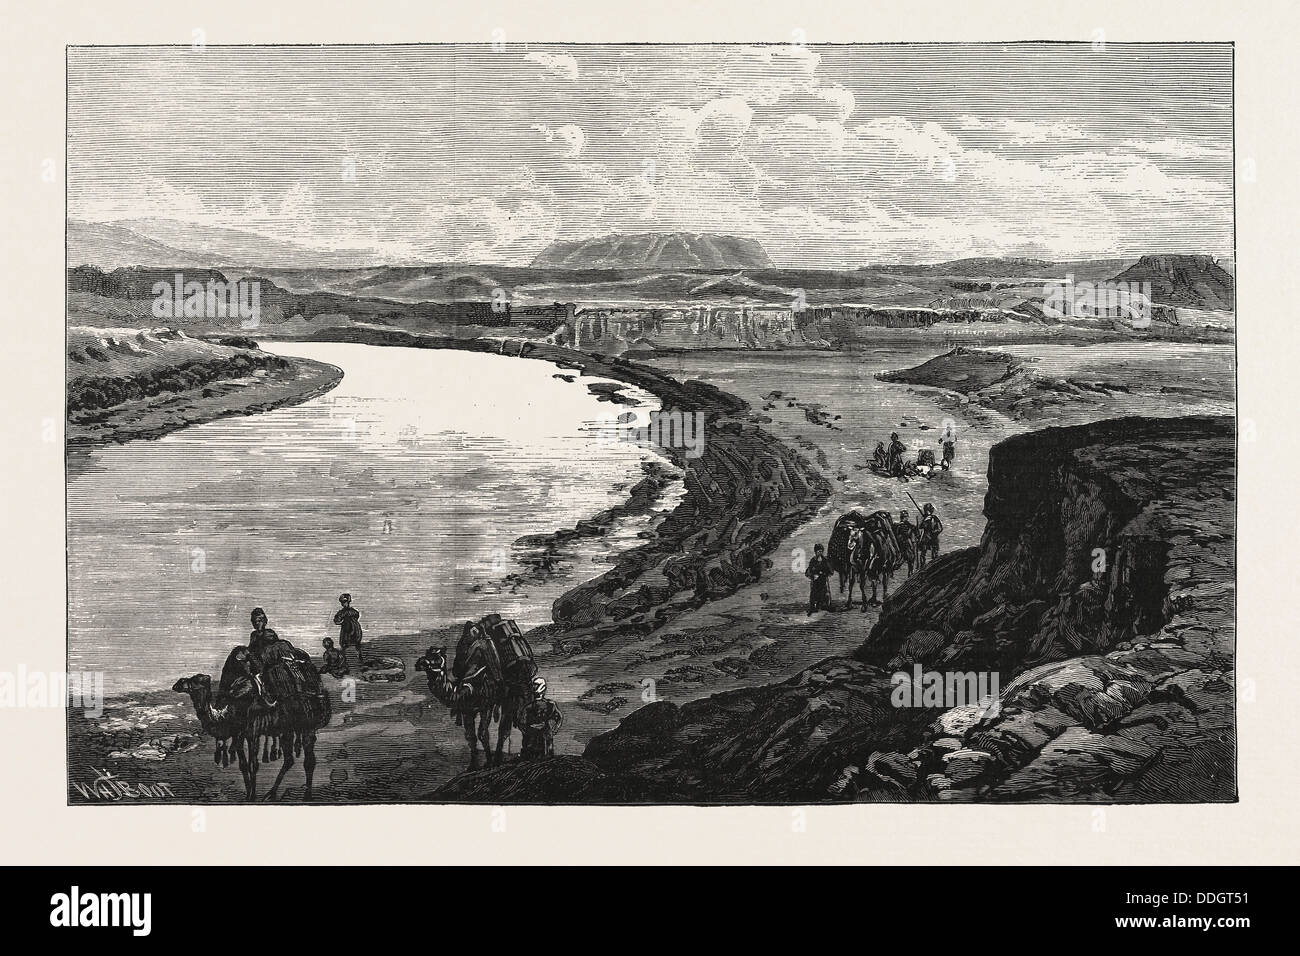 THE AFGHAN BOUNDARY: JUNCTION OF THE MURGHAB AND KUSHK RIVERS, AK-TAPA IN THE DISTANCE, 1885 Stock Photo